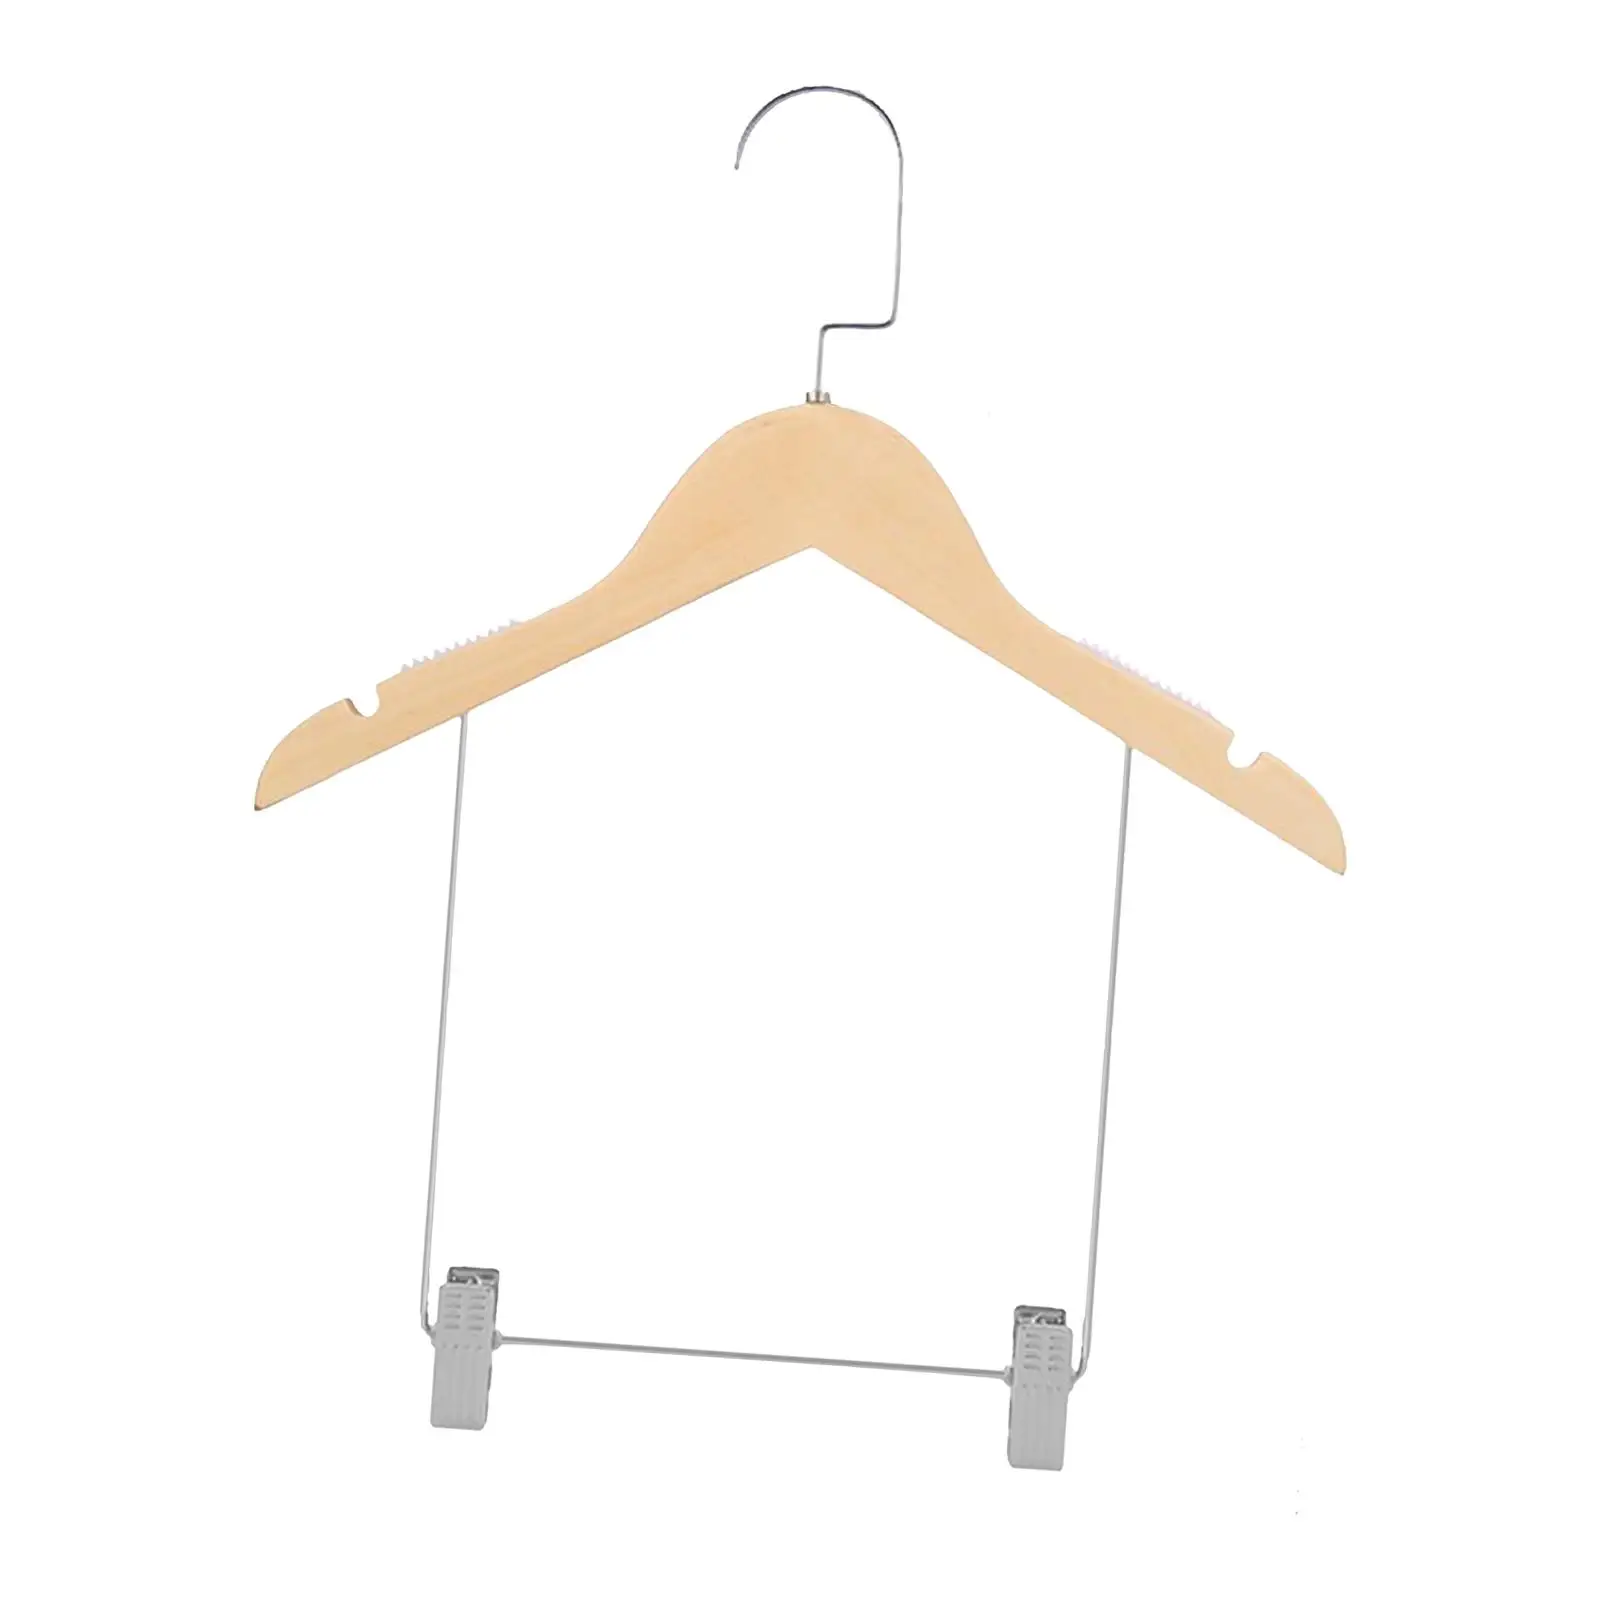 Wooden hangers with shoulder grooves with adjustable metal clips Heavy duty 360